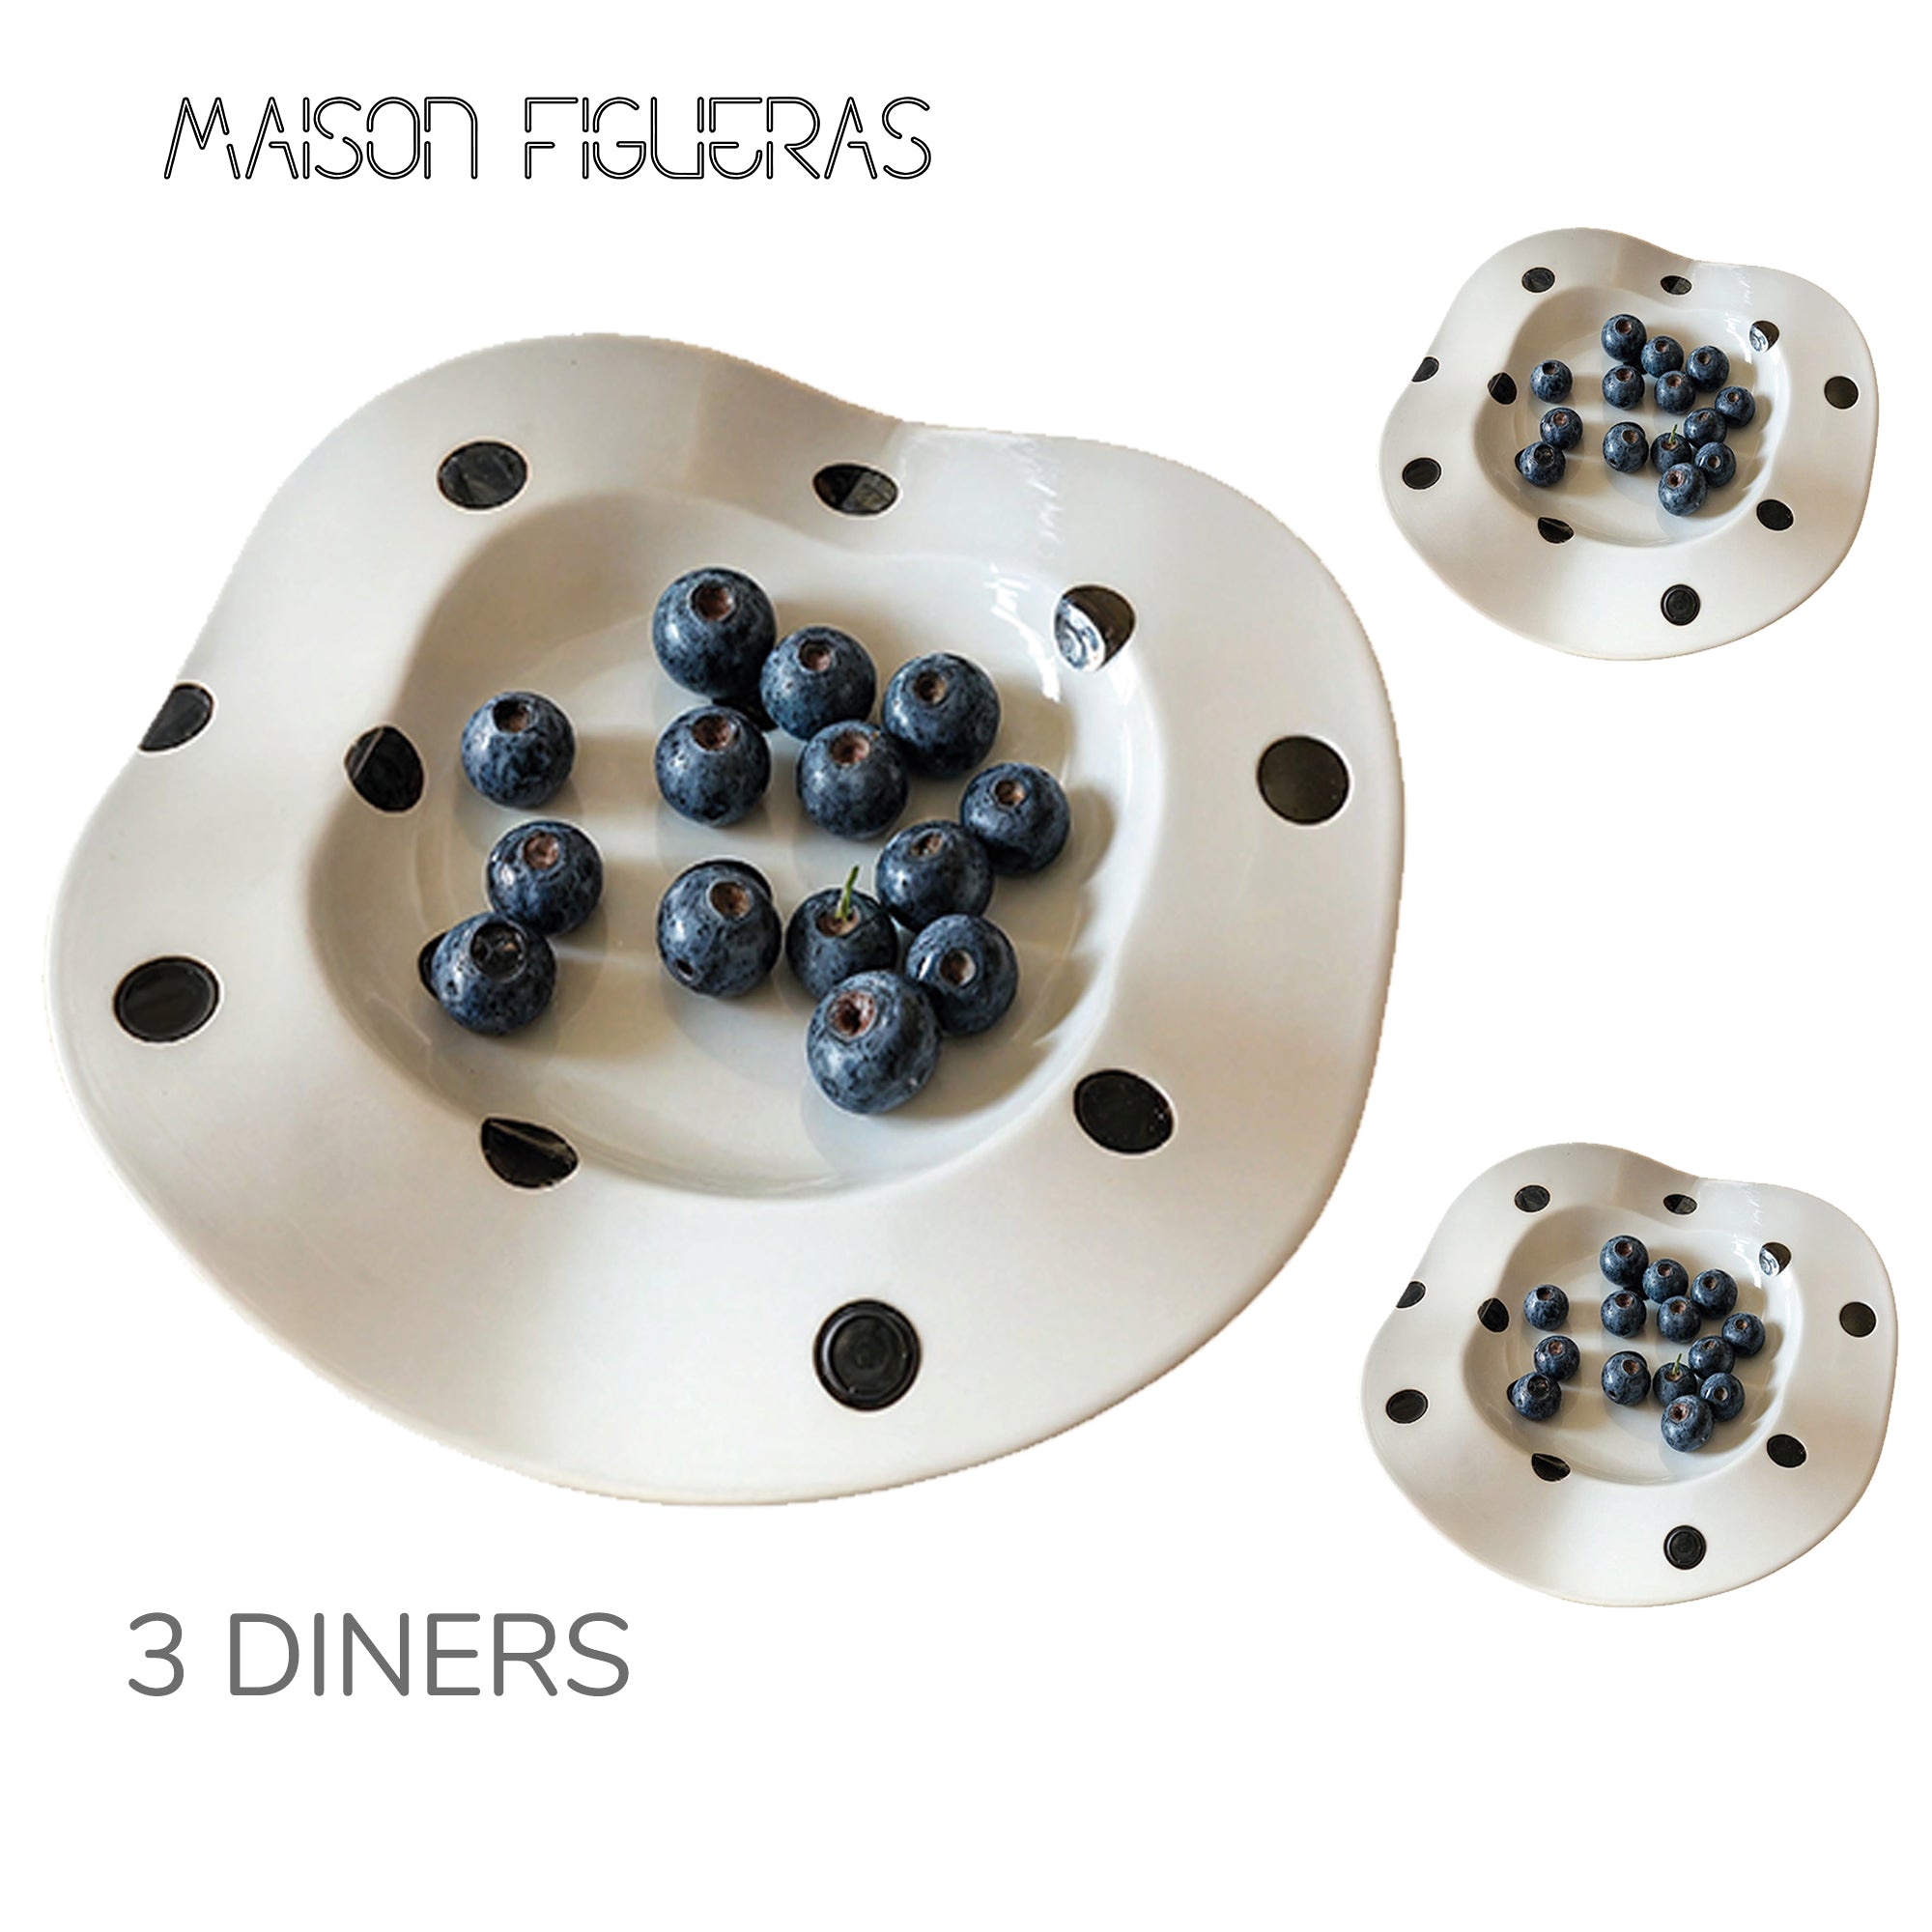 The Black and White Dishes